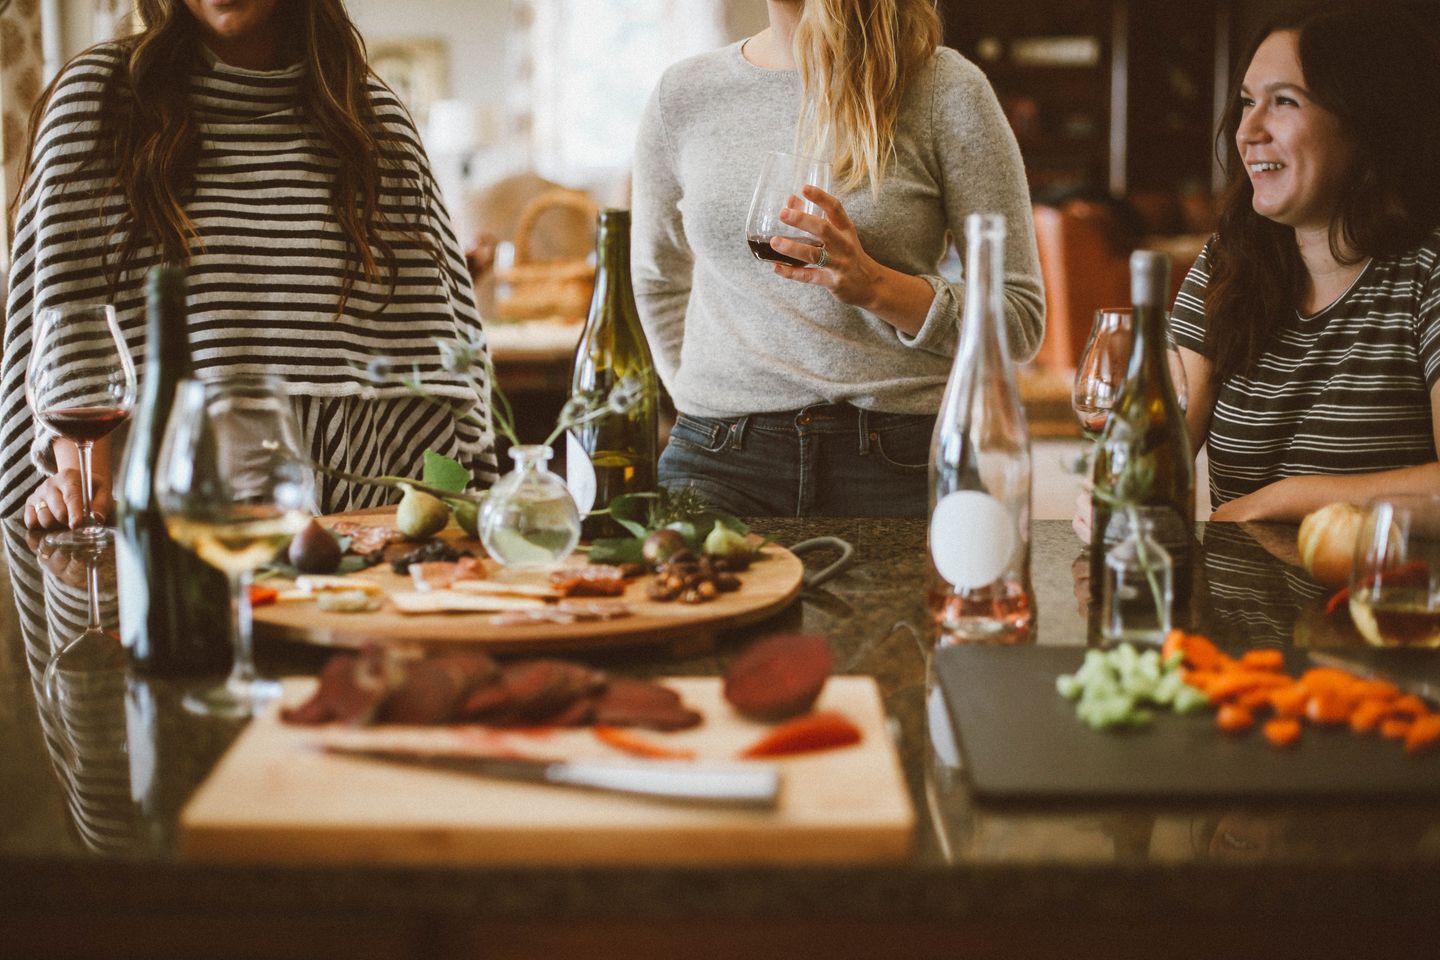 Wine and dine with these great cannabis dinner party ideas